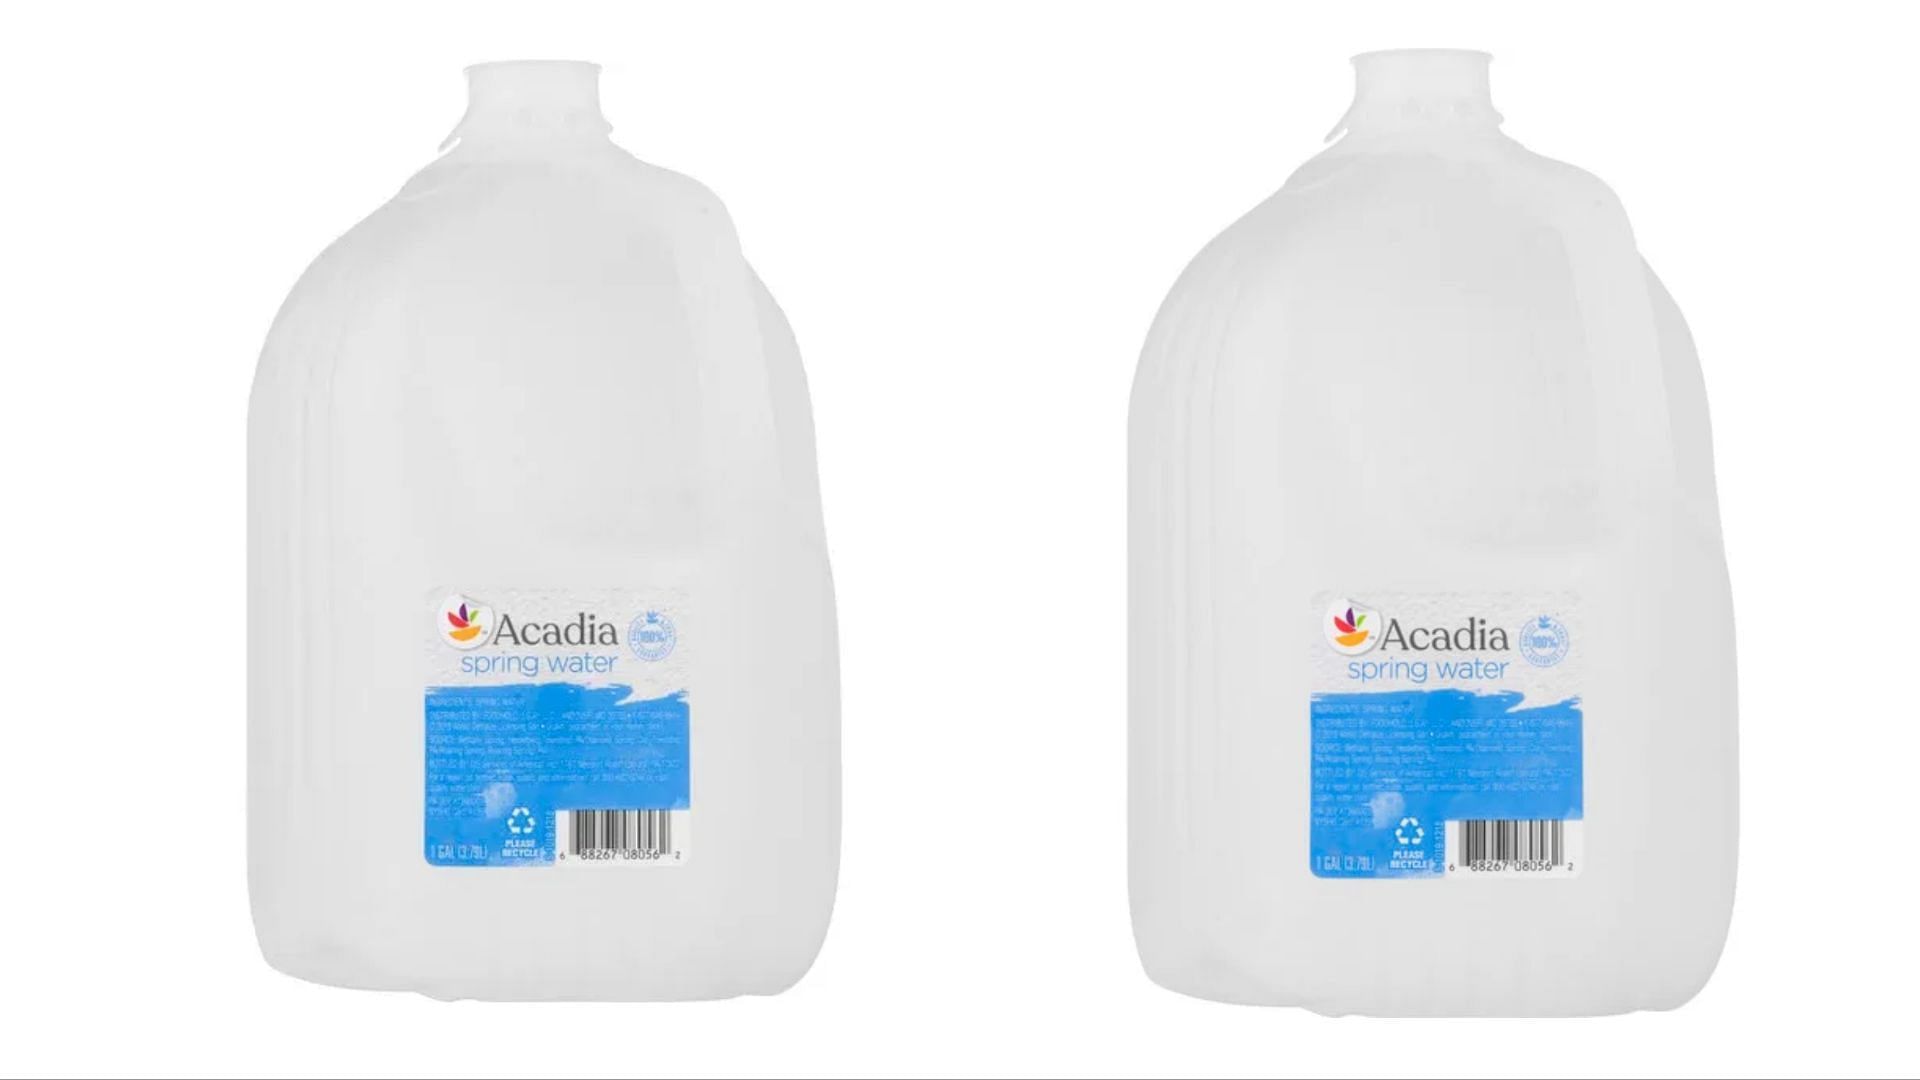 Acadia Spring Water is sourced from a facility that is nearly 20 miles from the location of the incident in East Palestine, Ohio (Image via Stop &amp; Shop)